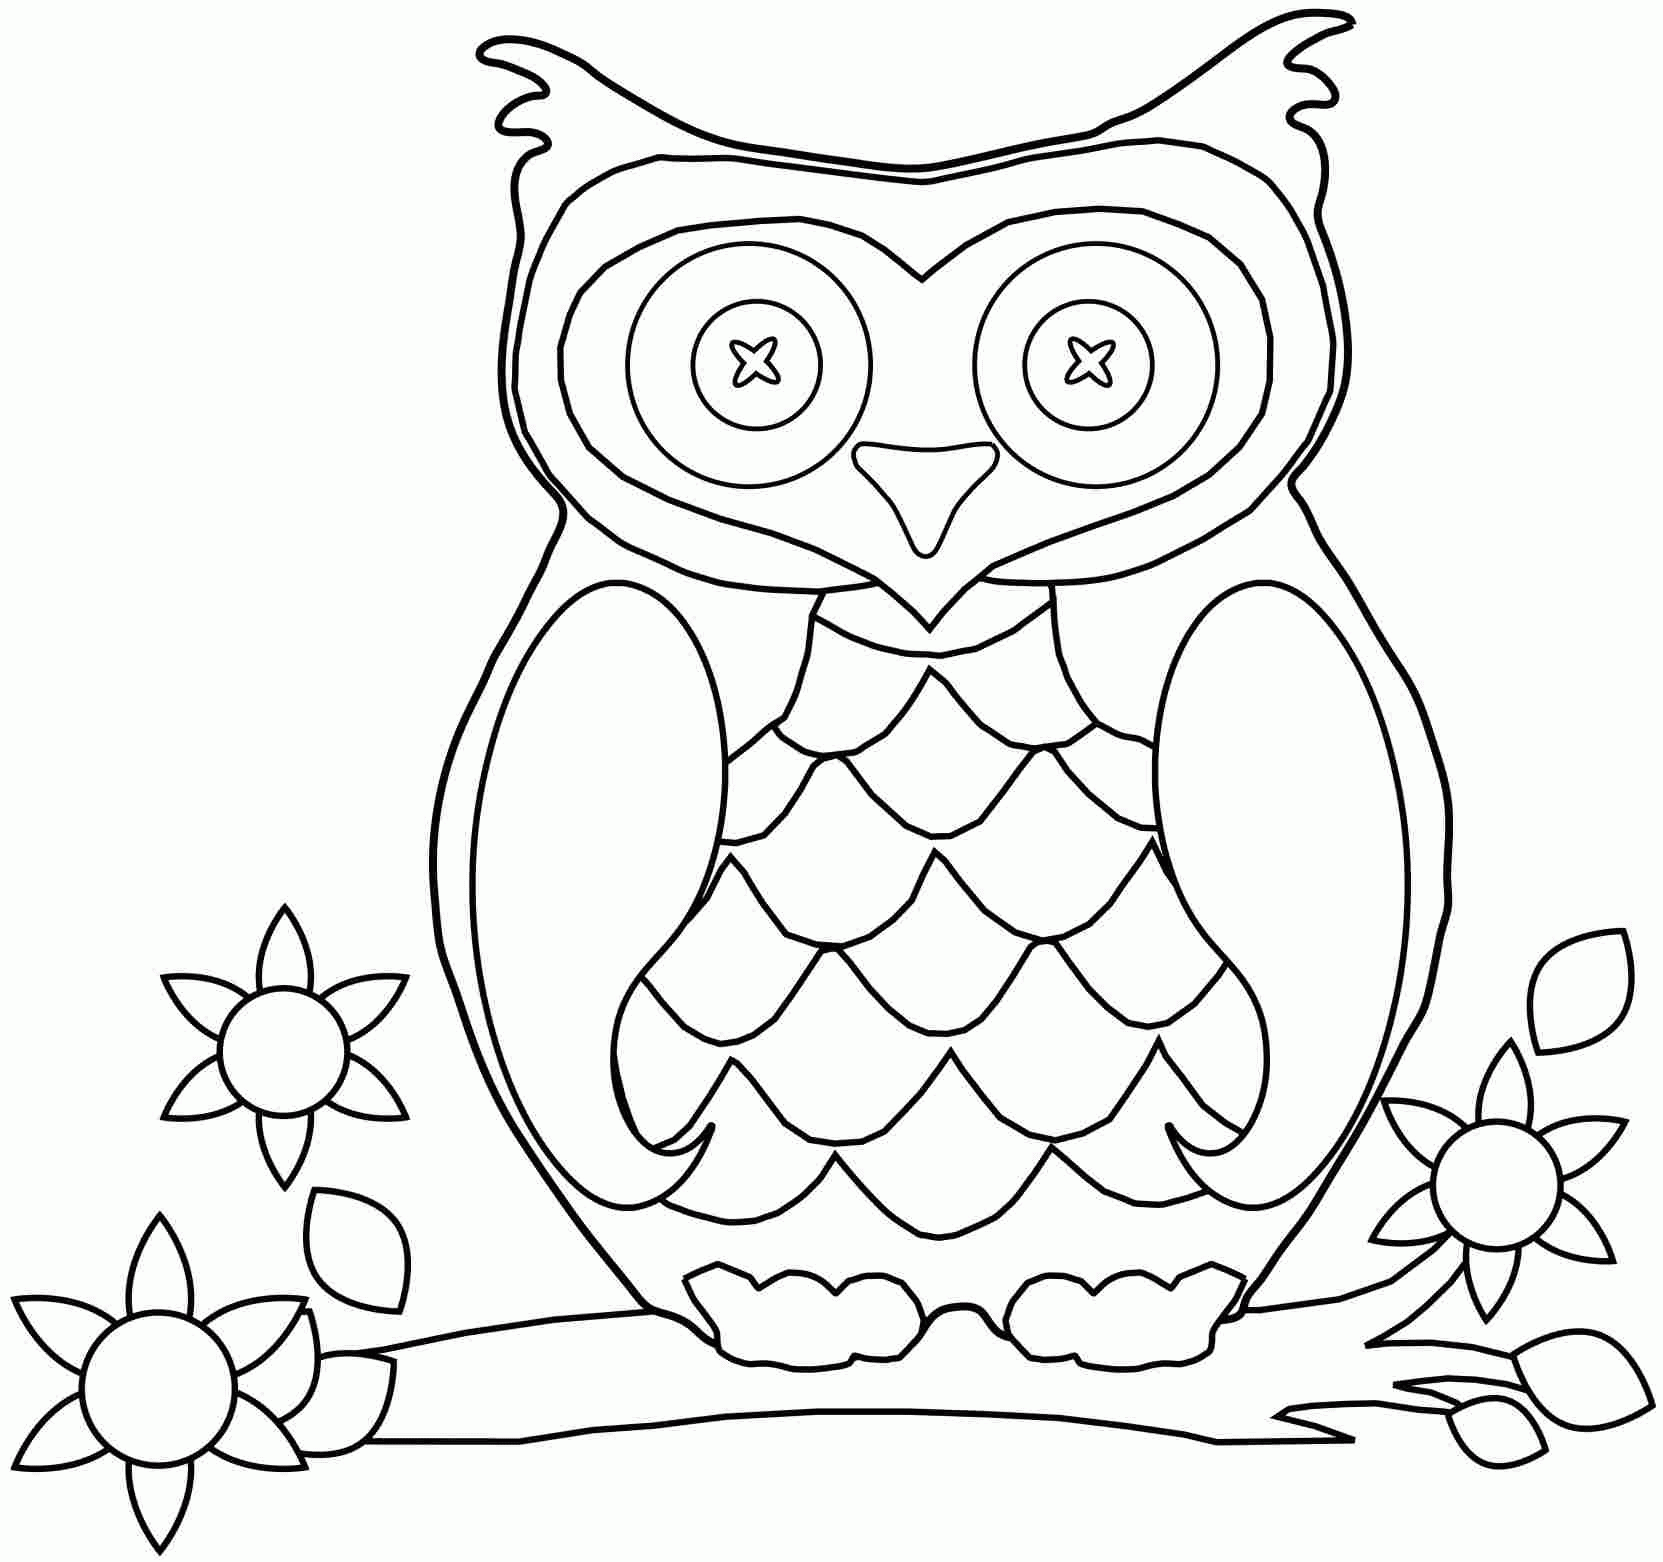 Owl Coloring Book Pages Or Picturesque Owl Coloring Book Pages ...